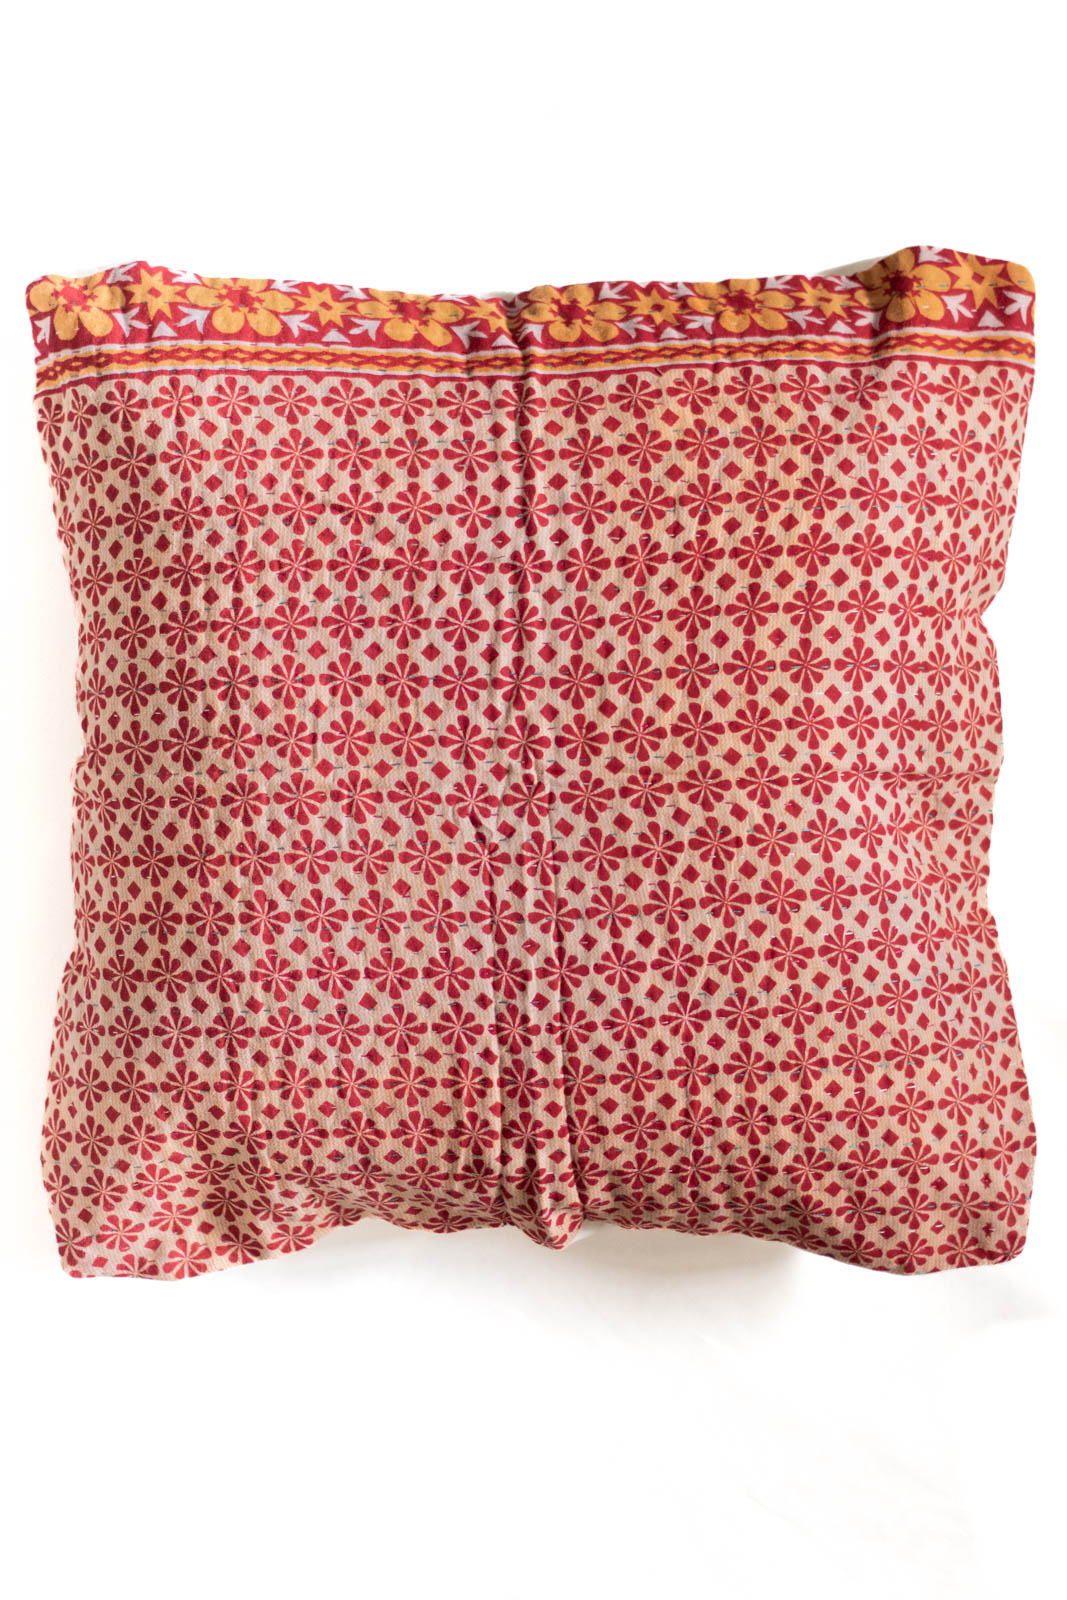 Dignity no. 8 Kantha Pillow Cover